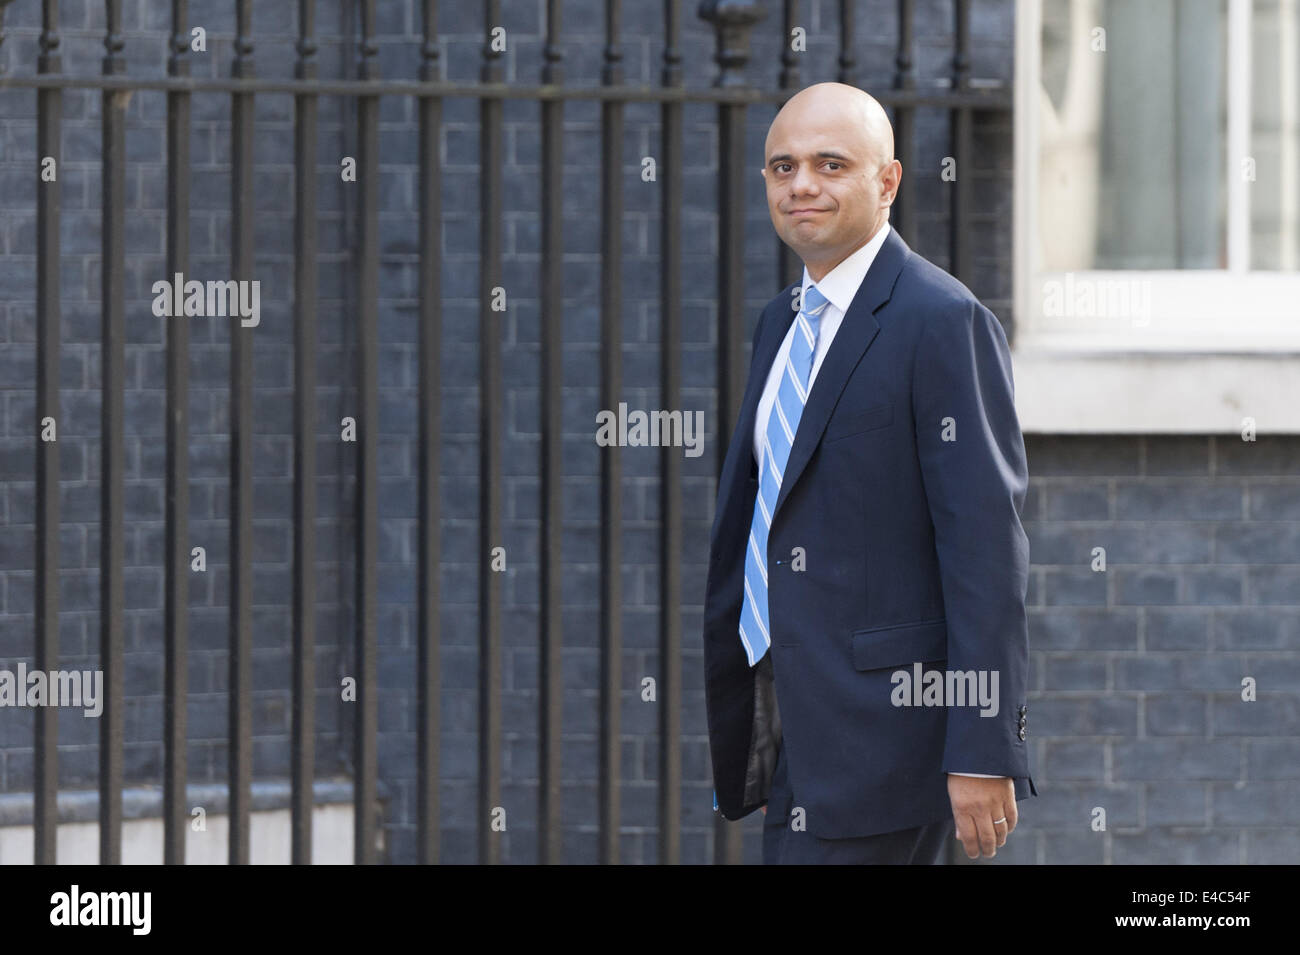 London, UK. 8th July, 2014. UK government ministers attend 10 Downing Street in London for the weekly Cabinet Meeting. Pictured: SAJID JAVID MP -.Secretary of State for Culture, Media and Sport; Minister for Equalities © Lee Thomas/ZUMA Wire/Alamy Live News Stock Photo